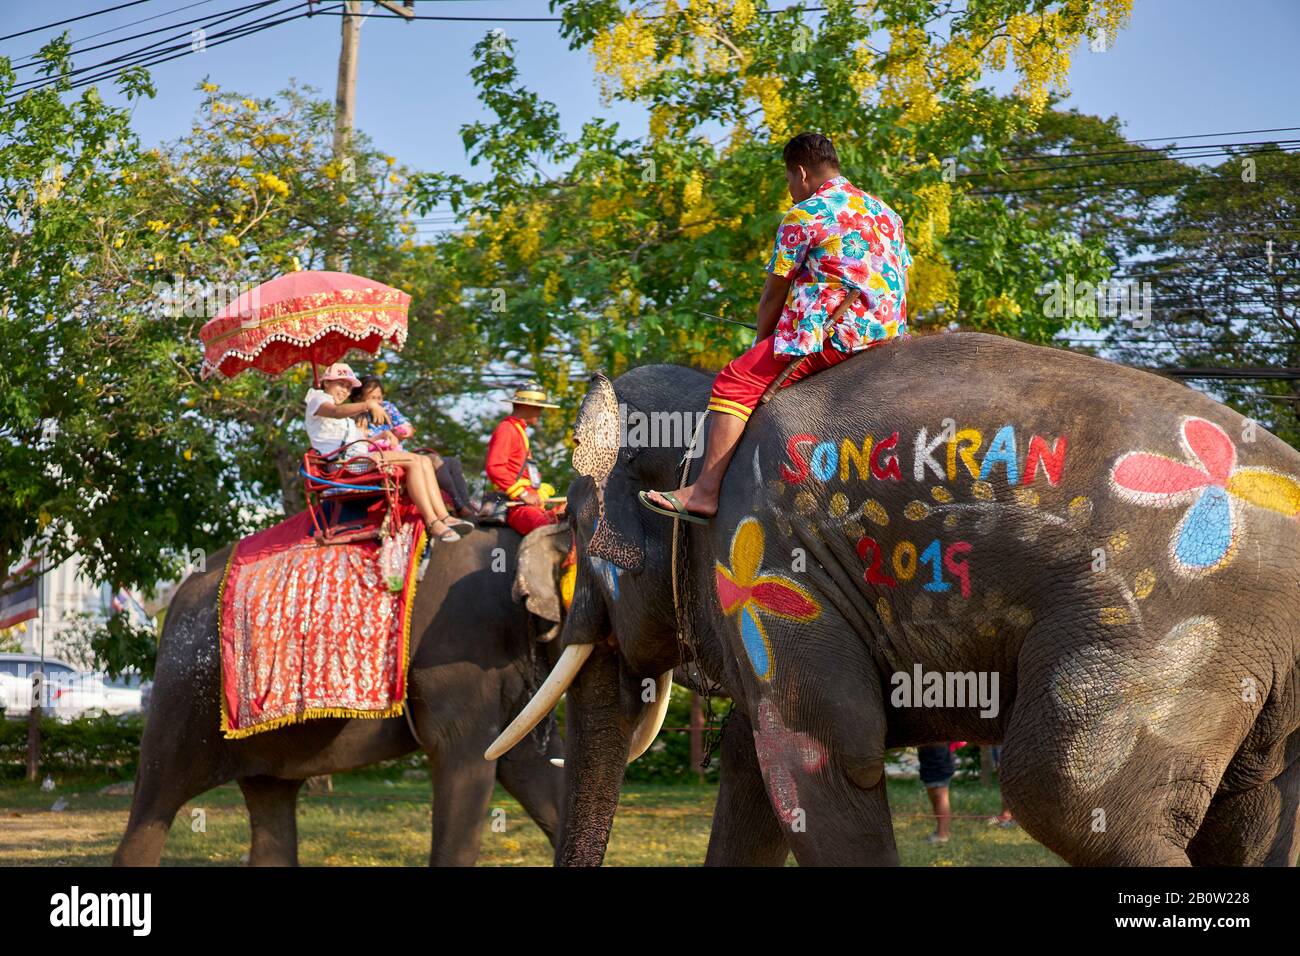 Take the family on an elephant for a vacation. Stock Photo